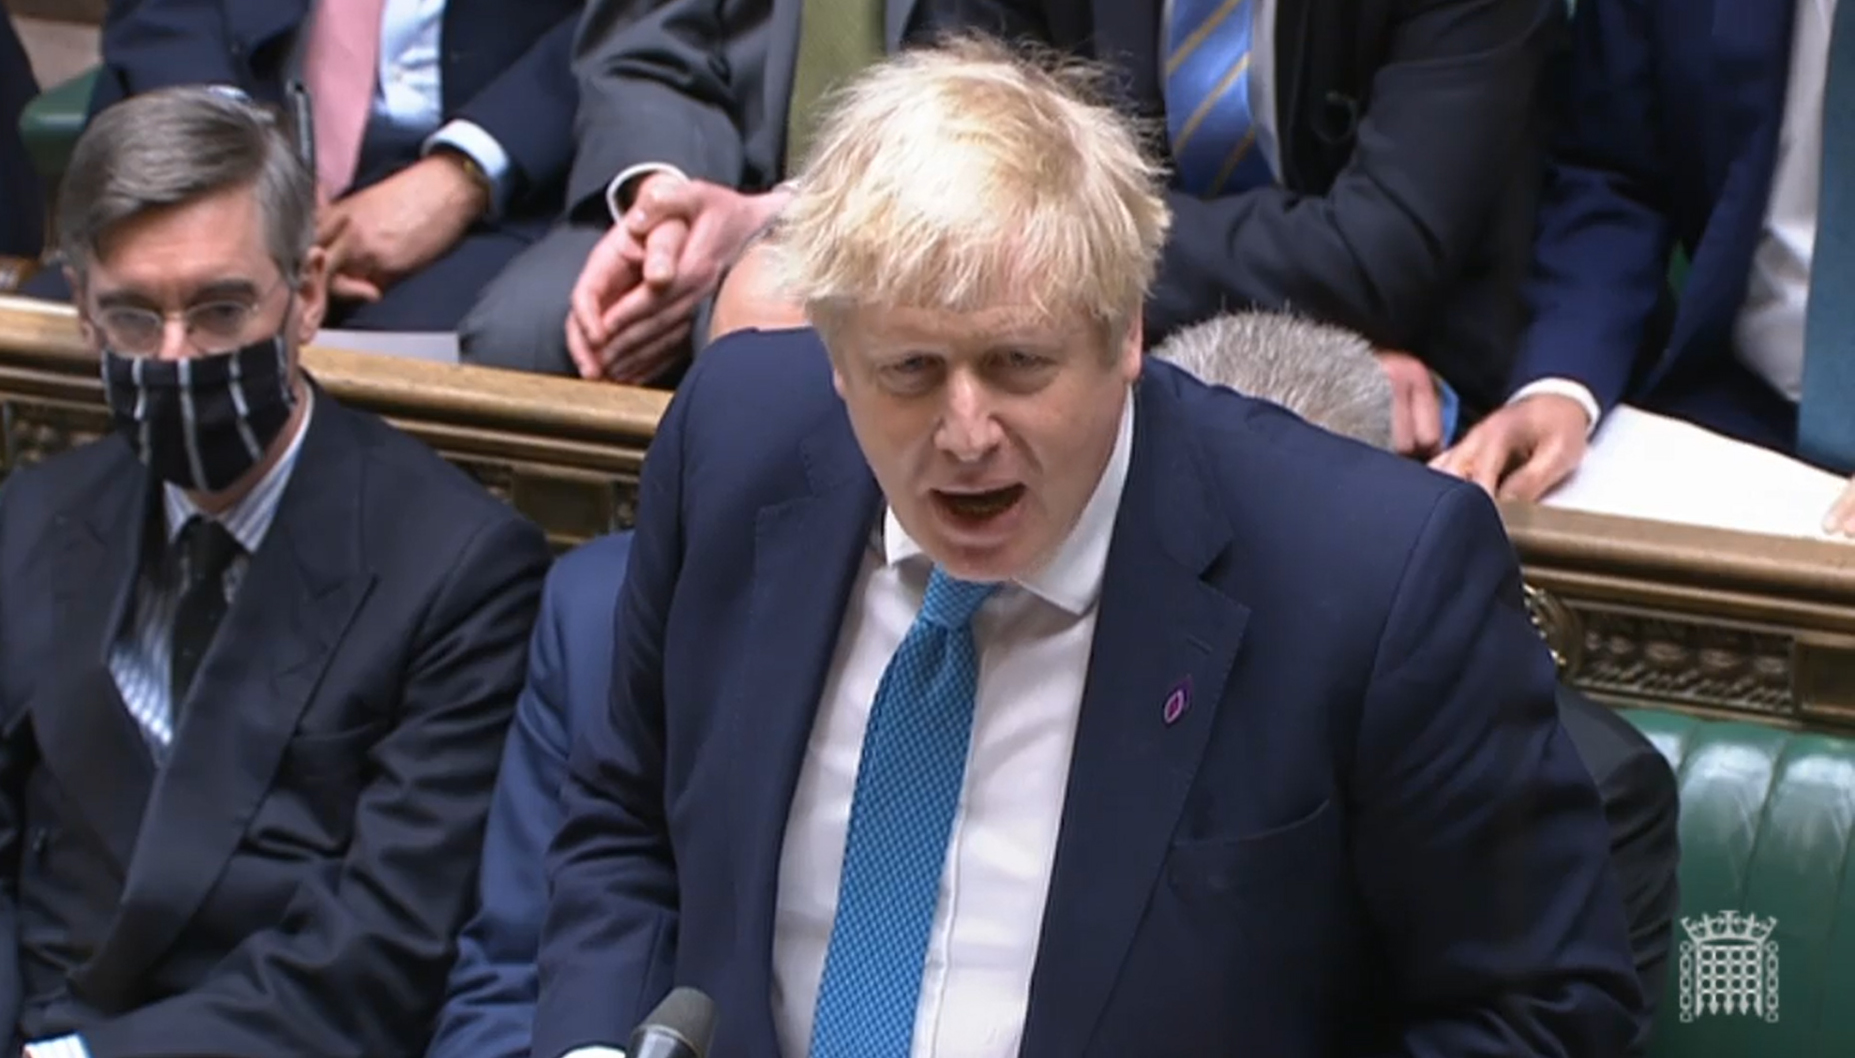 Prime Minister Boris Johnson speaks during Prime Minister's Questions in the House of Commons, London, on January 26.